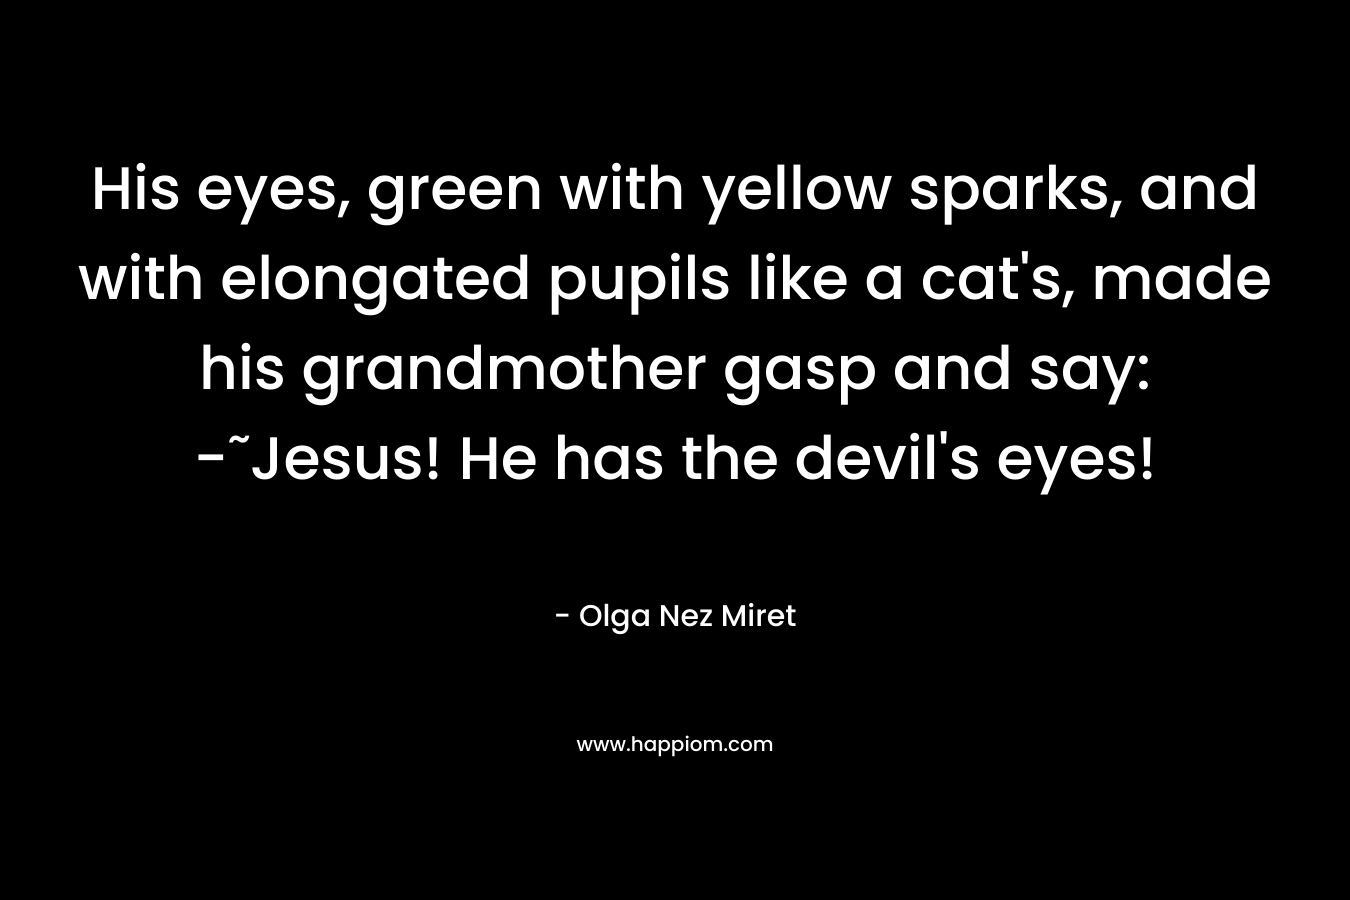 His eyes, green with yellow sparks, and with elongated pupils like a cat’s, made his grandmother gasp and say: -˜Jesus! He has the devil’s eyes! – Olga Nez Miret